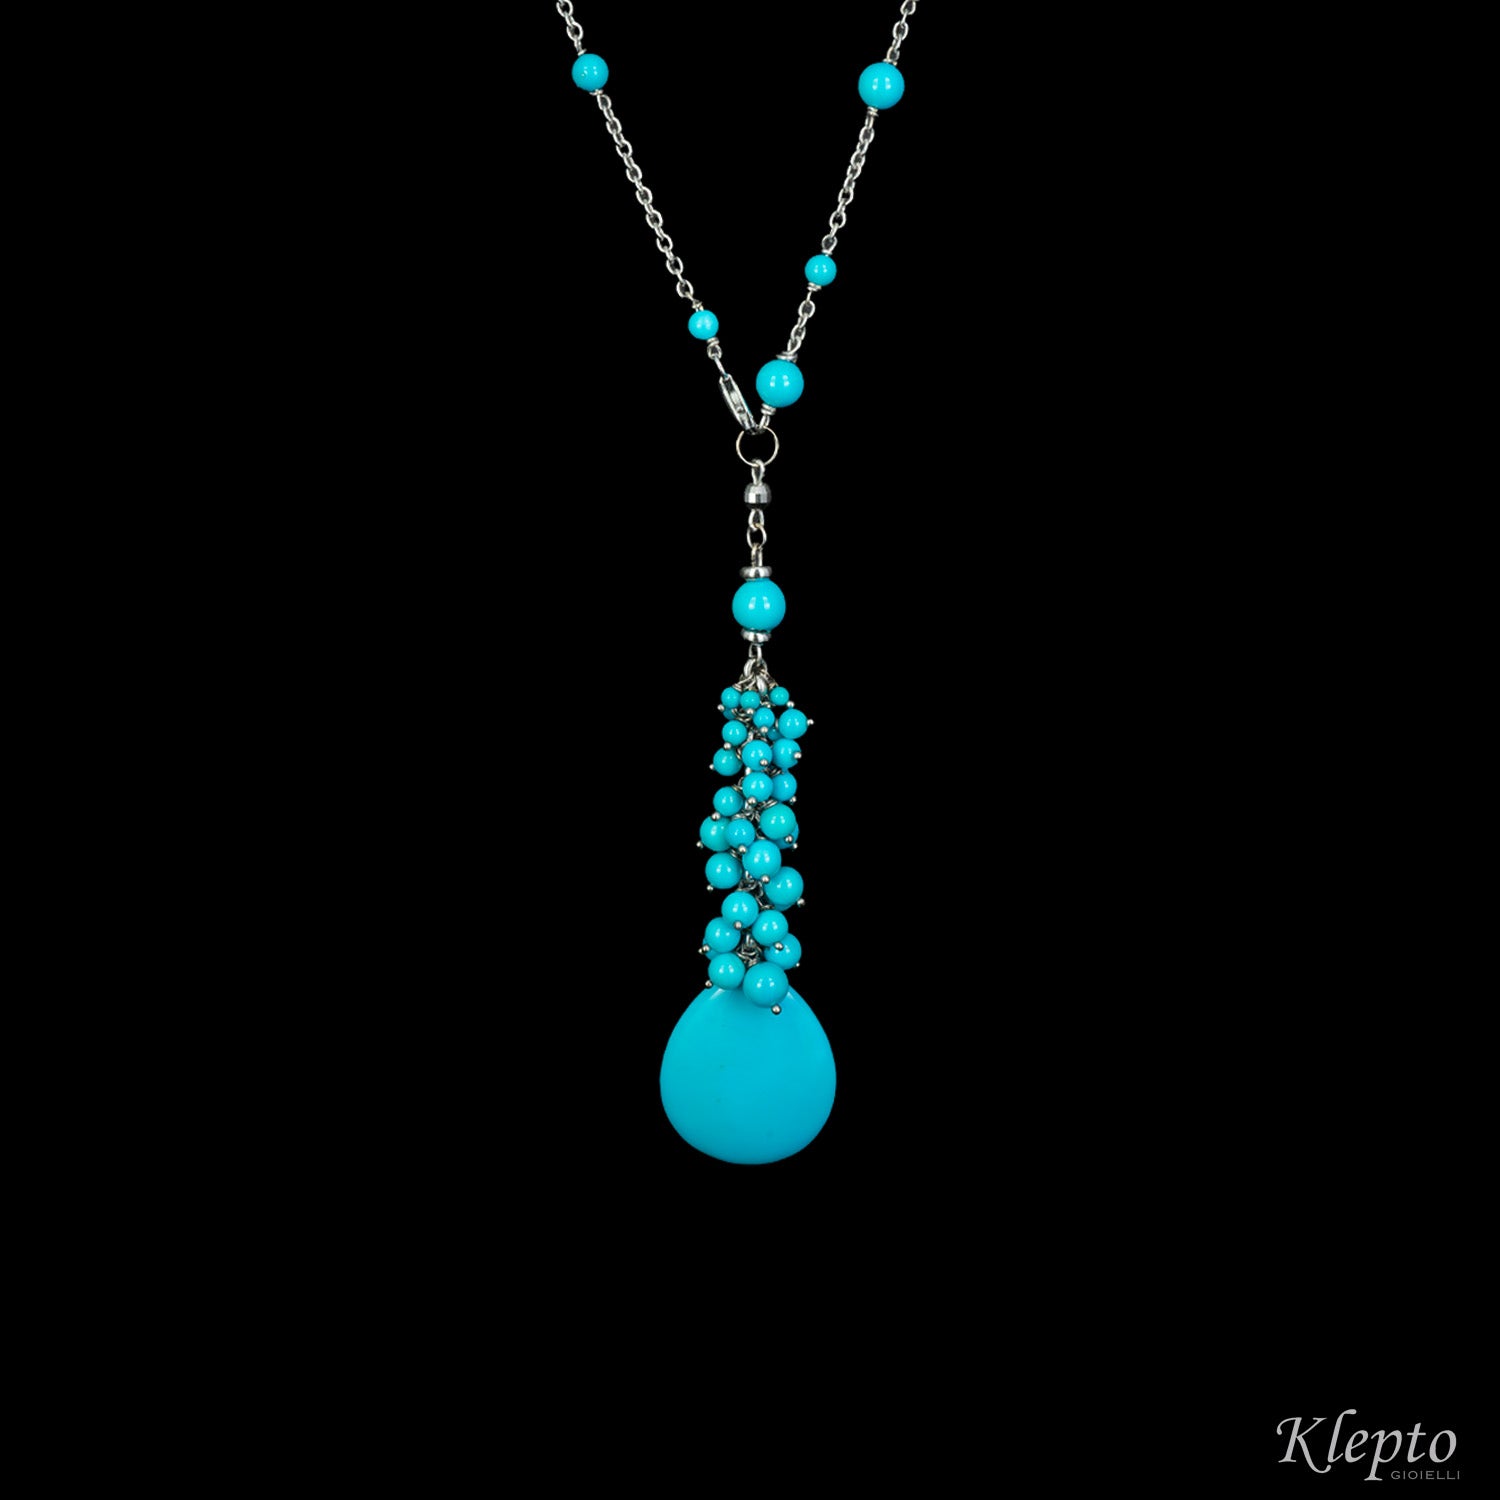 Tassel necklace in white gold with Turquoise